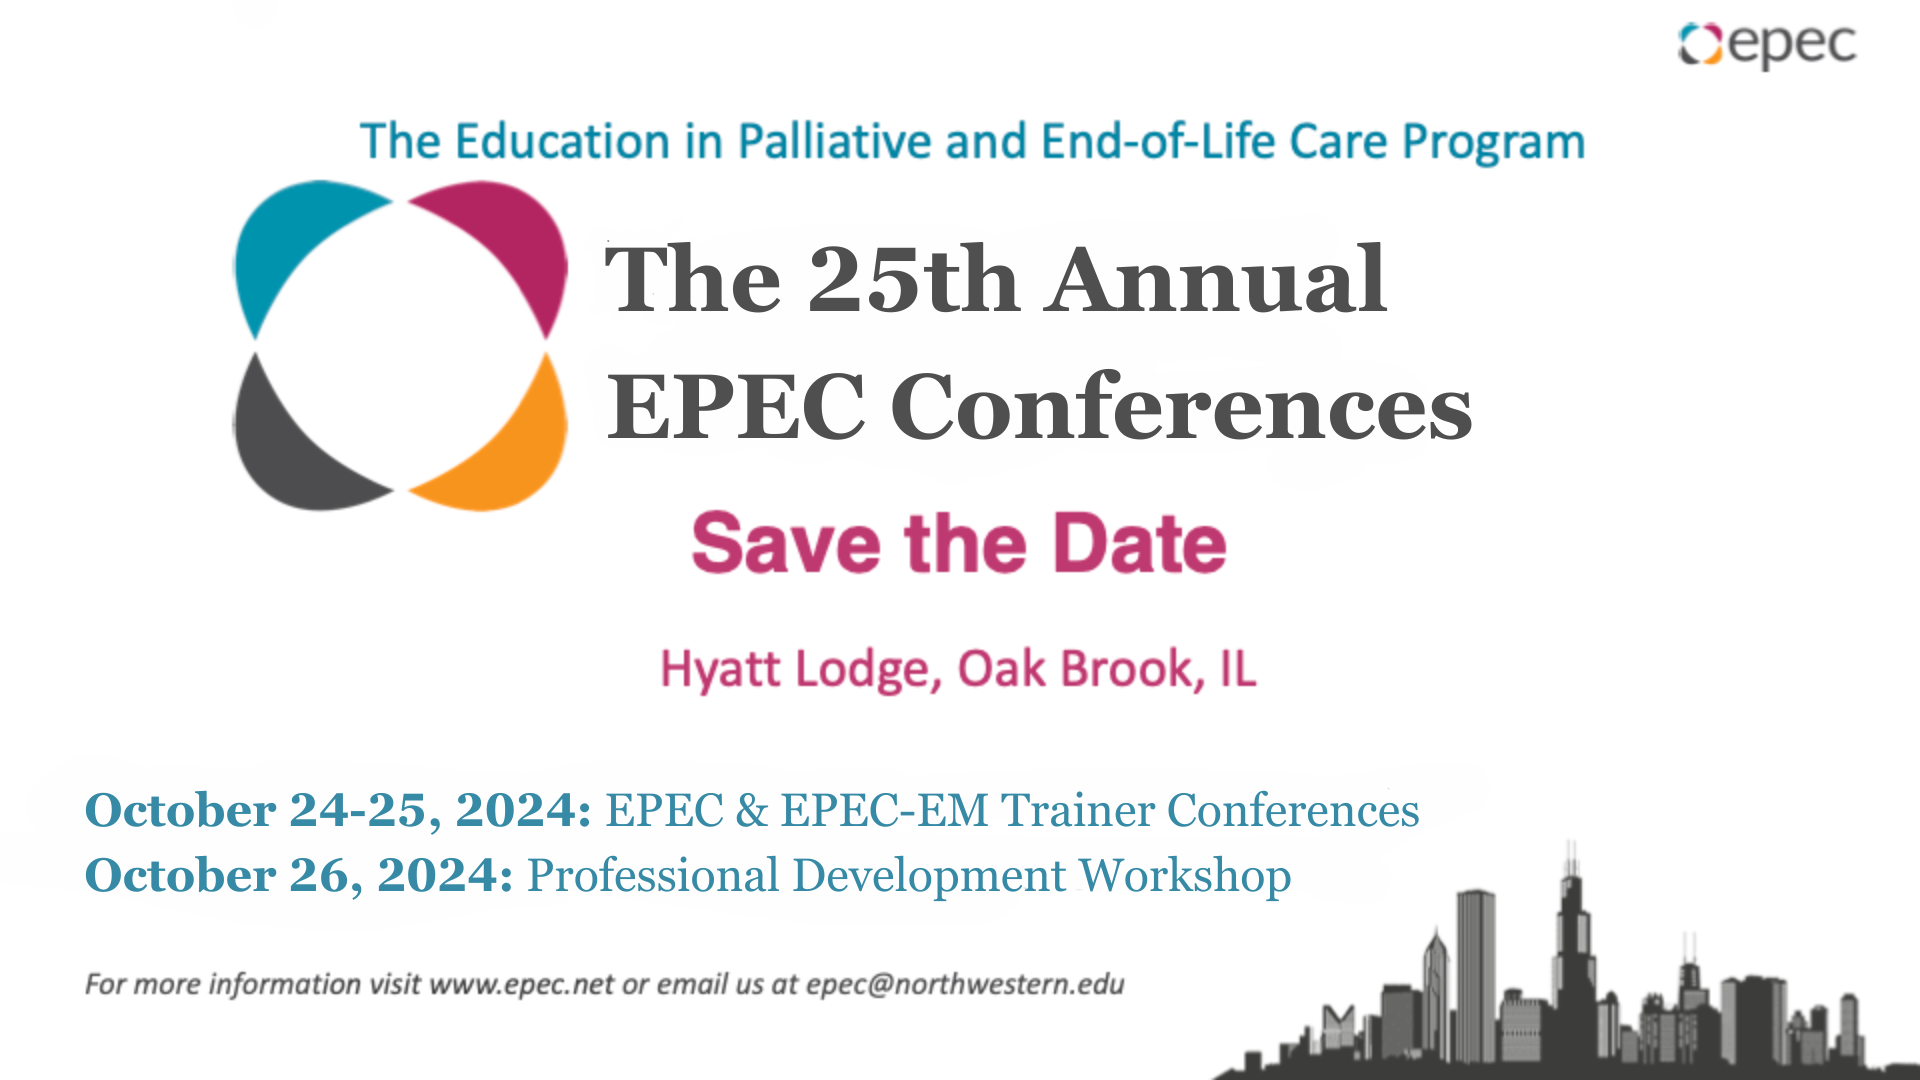 epec-conference-save-the-date-2024.png